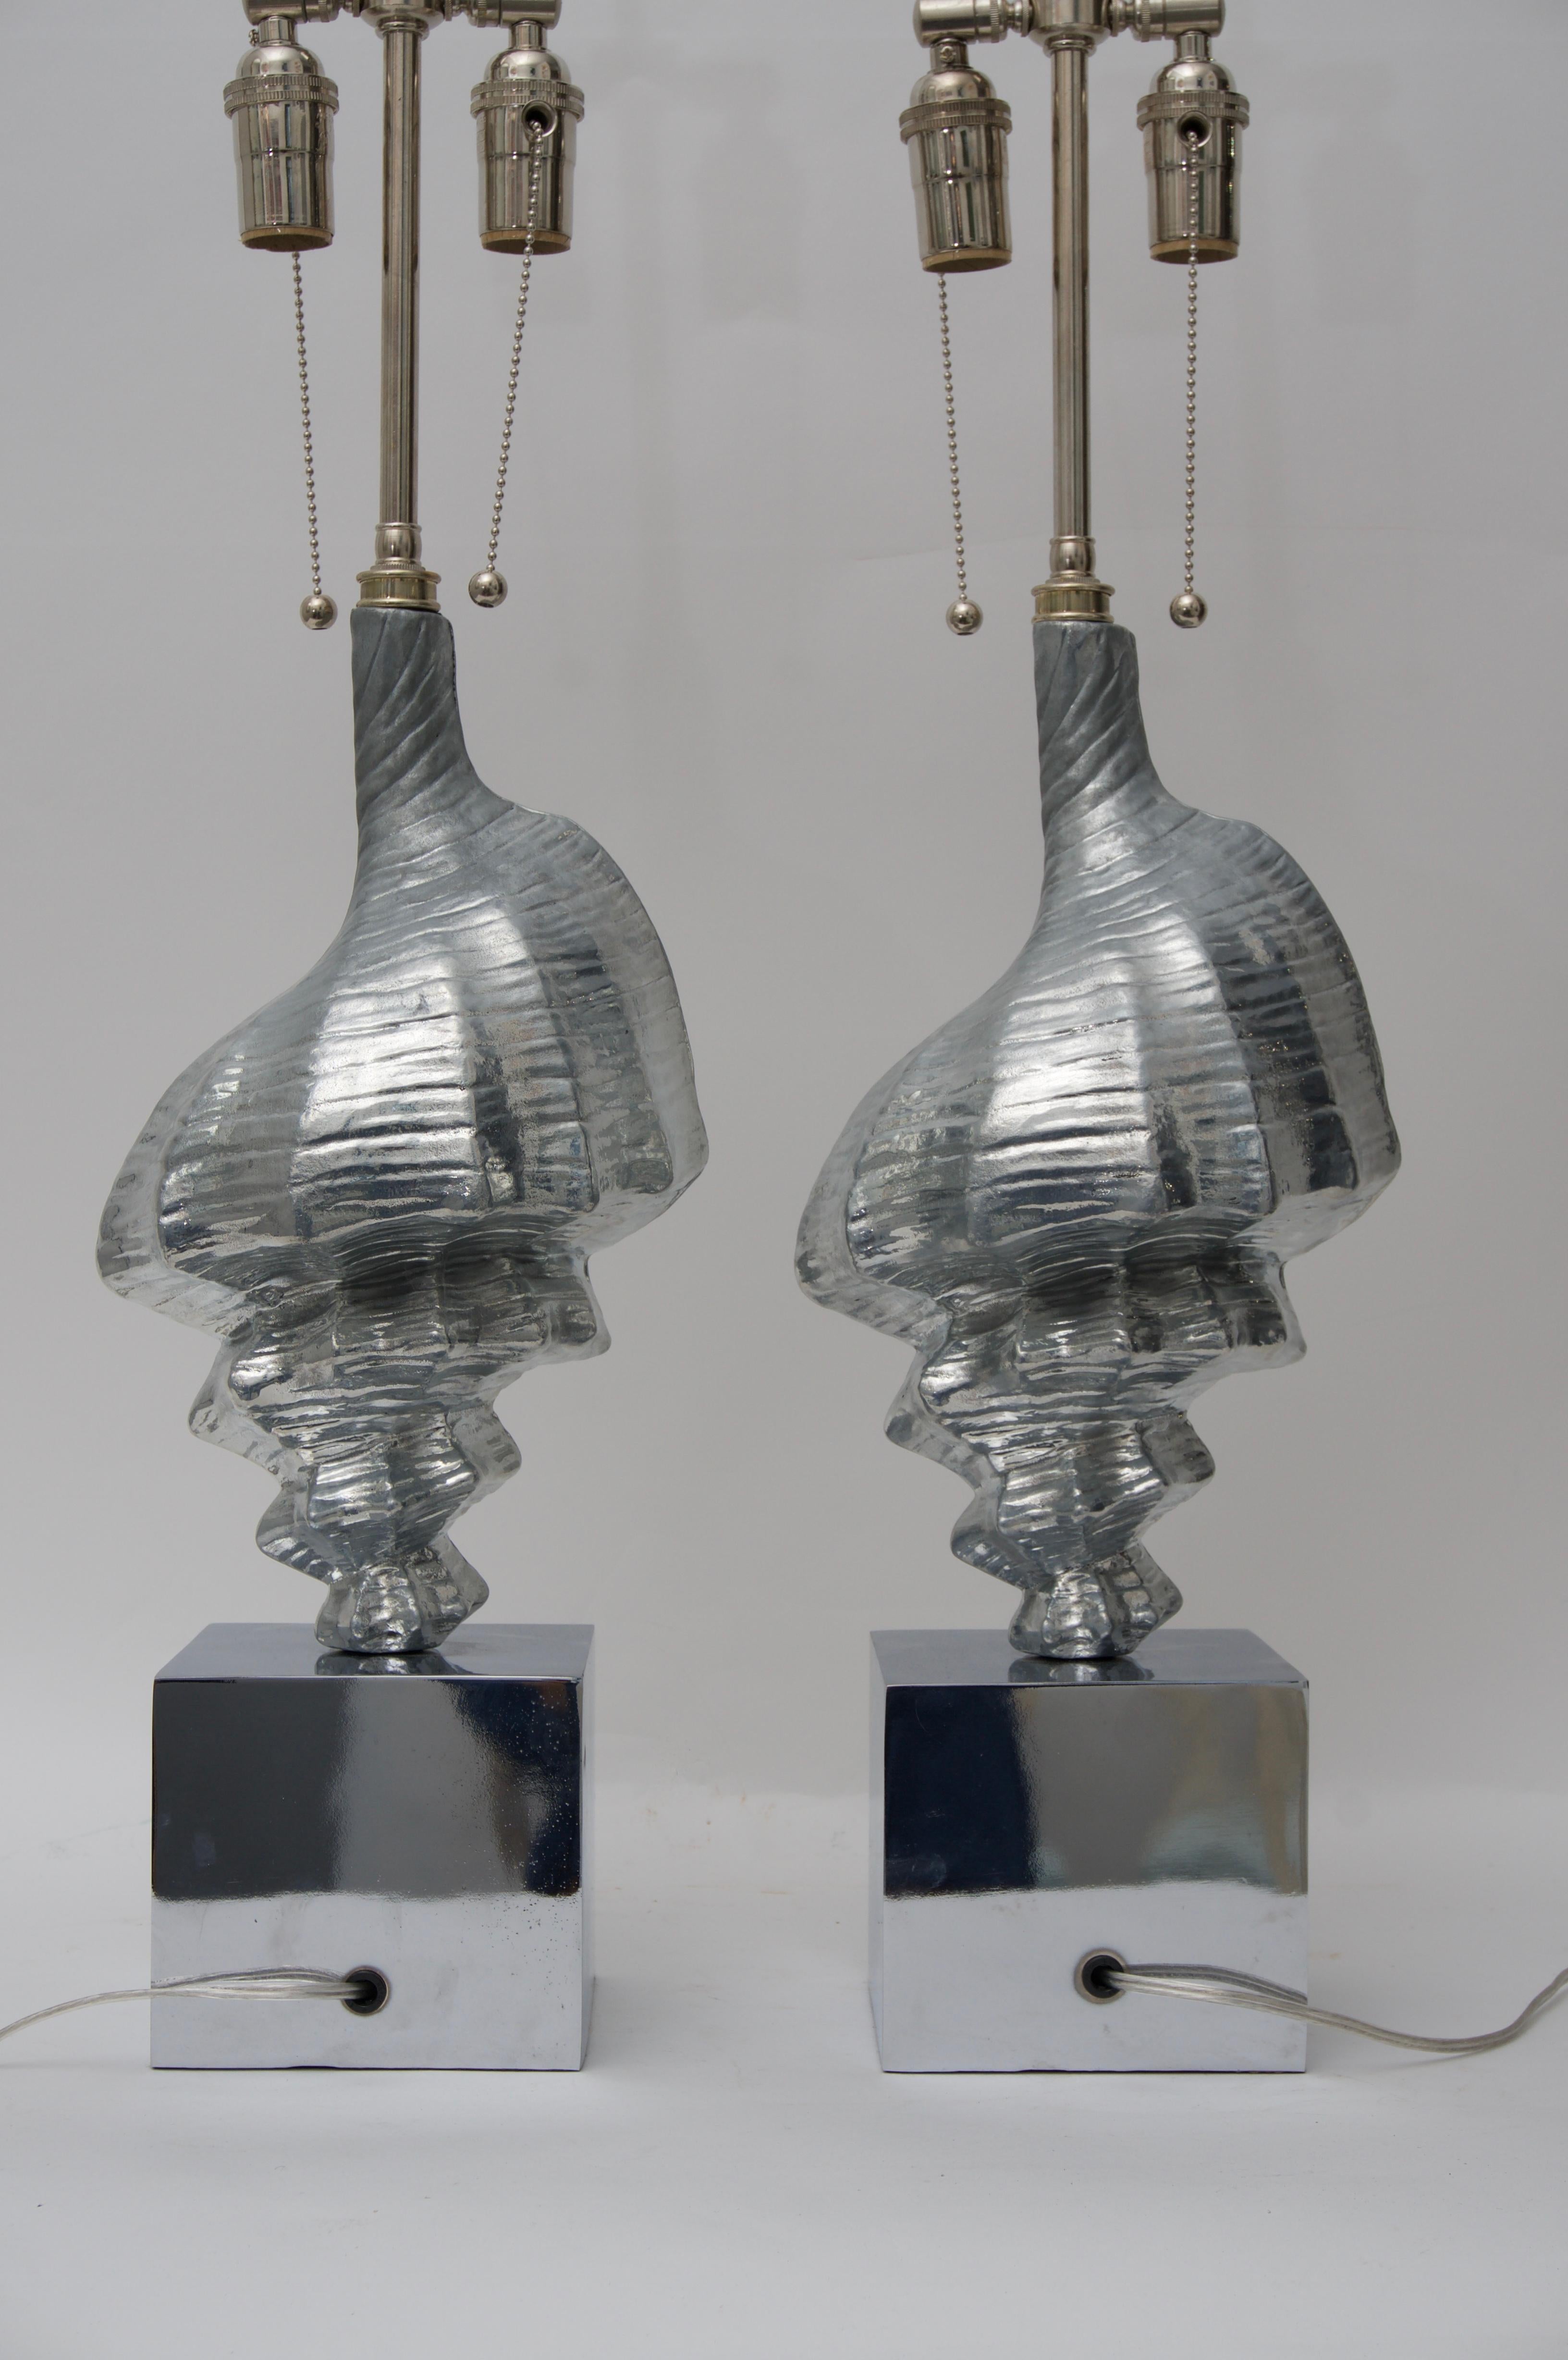 This stylish pair of seashell-form table lamps are very much in the style and quality of pieces created by Arthur Court.